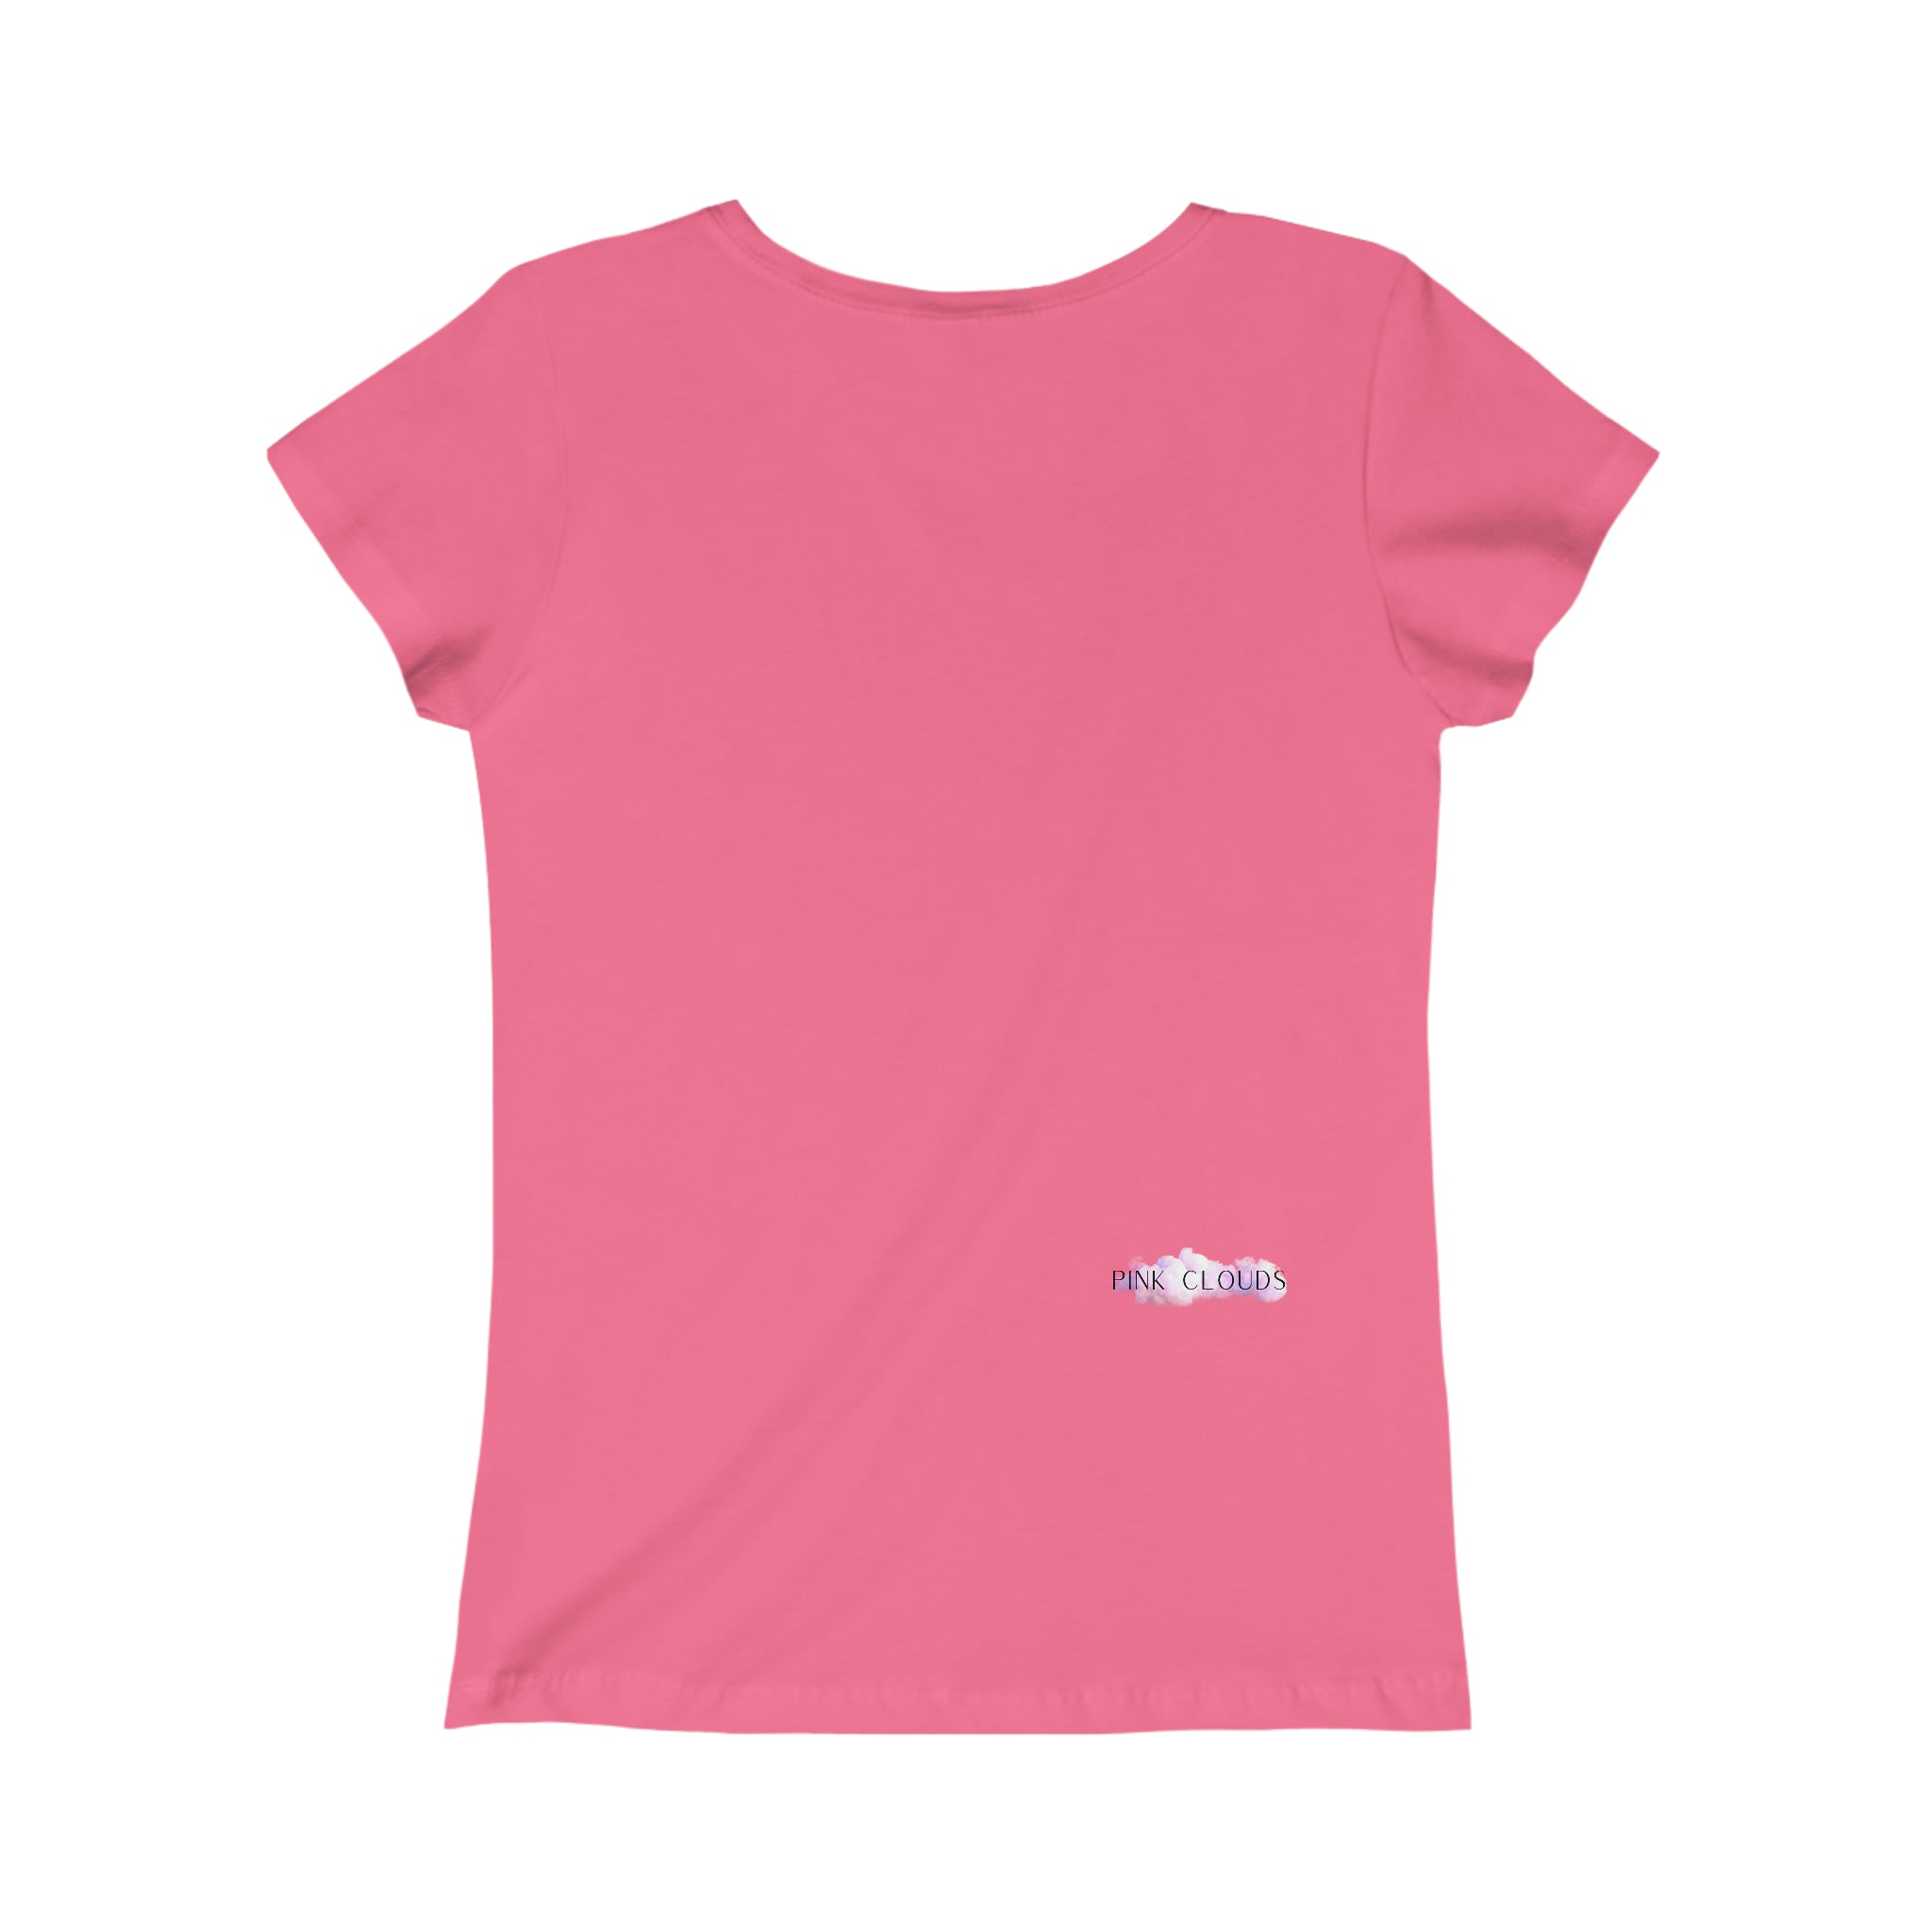 GO OUT - Girls Princess Tee